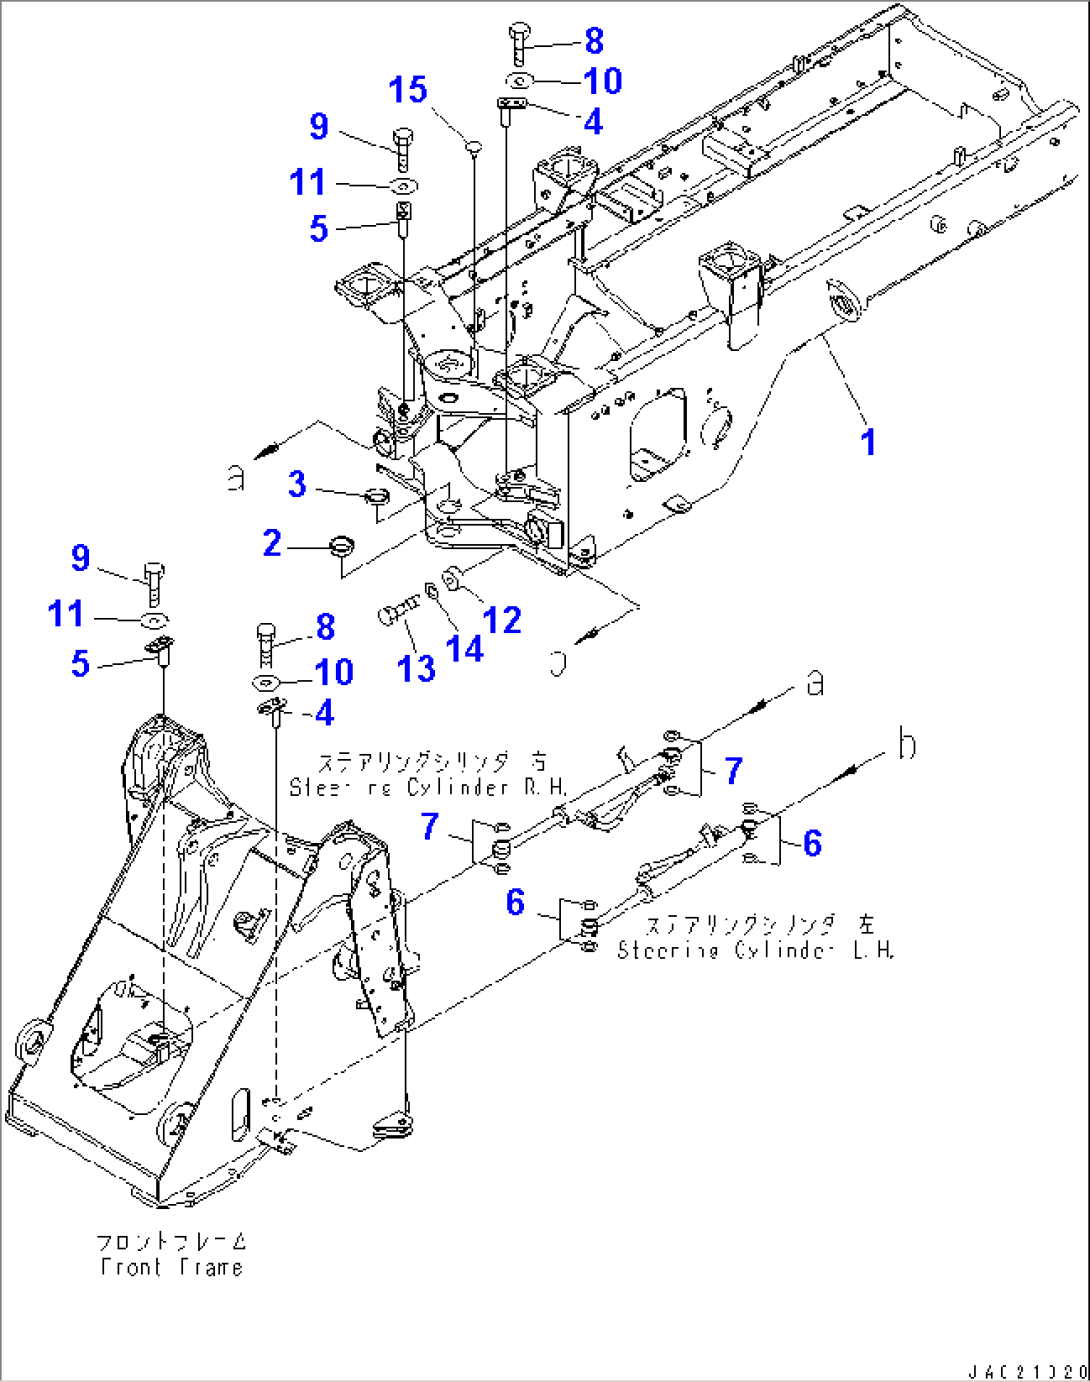 REAR FRAME (FOR ADDITIONAL COUNTERWEIGHT AND POWER TRAIN GUARD)